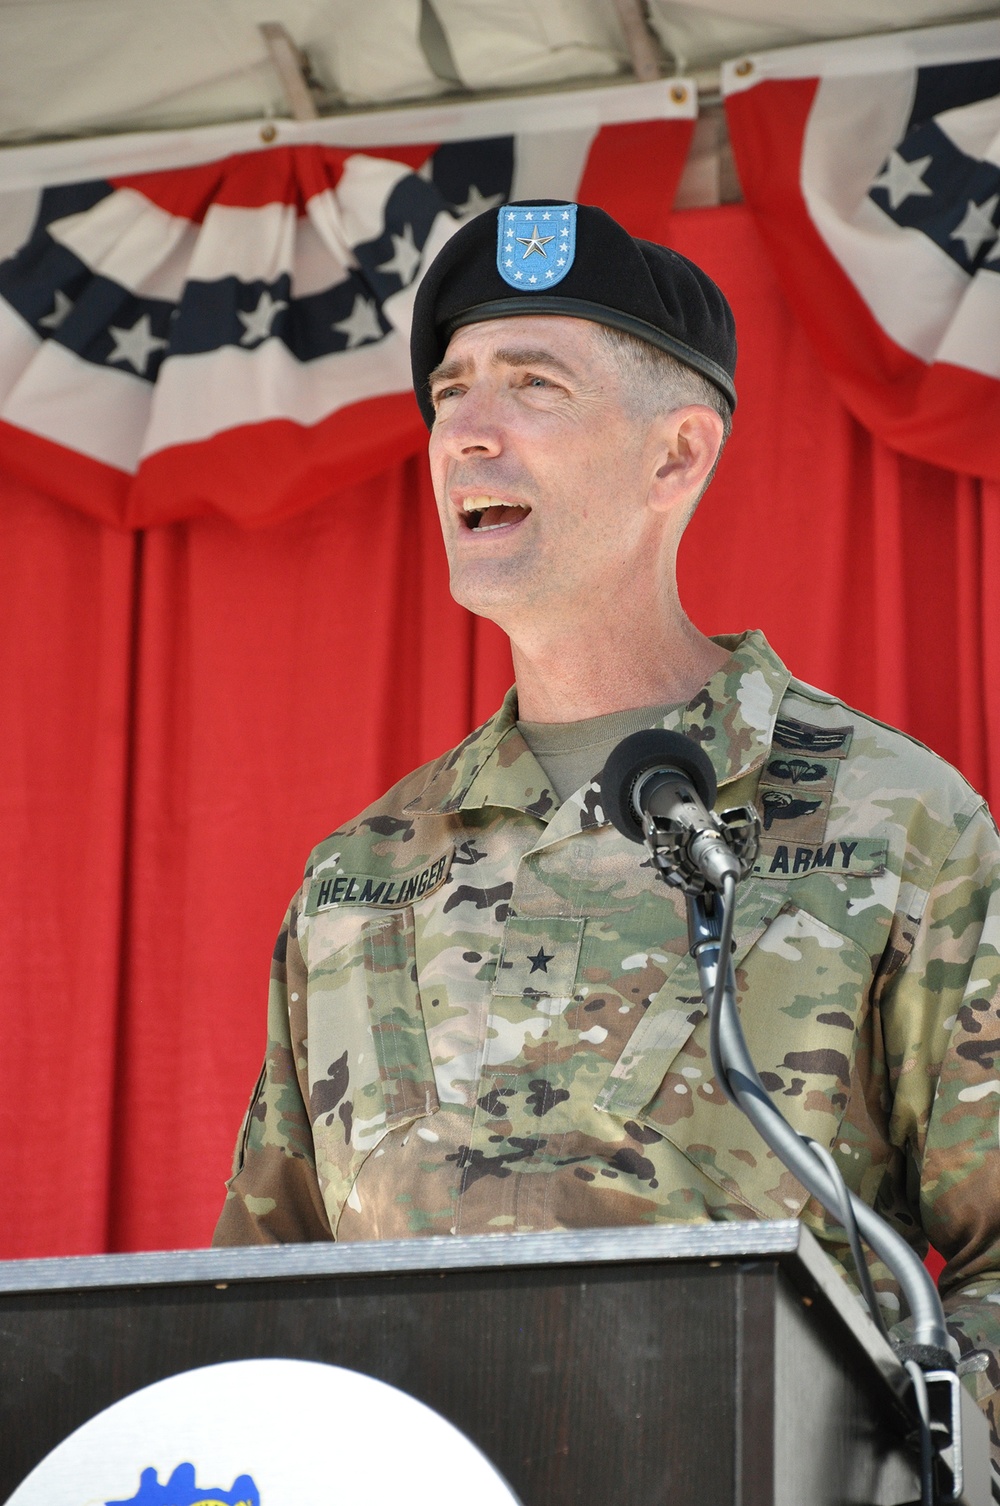 Barta becomes 62nd Corps of Engineers Los Angeles District commander